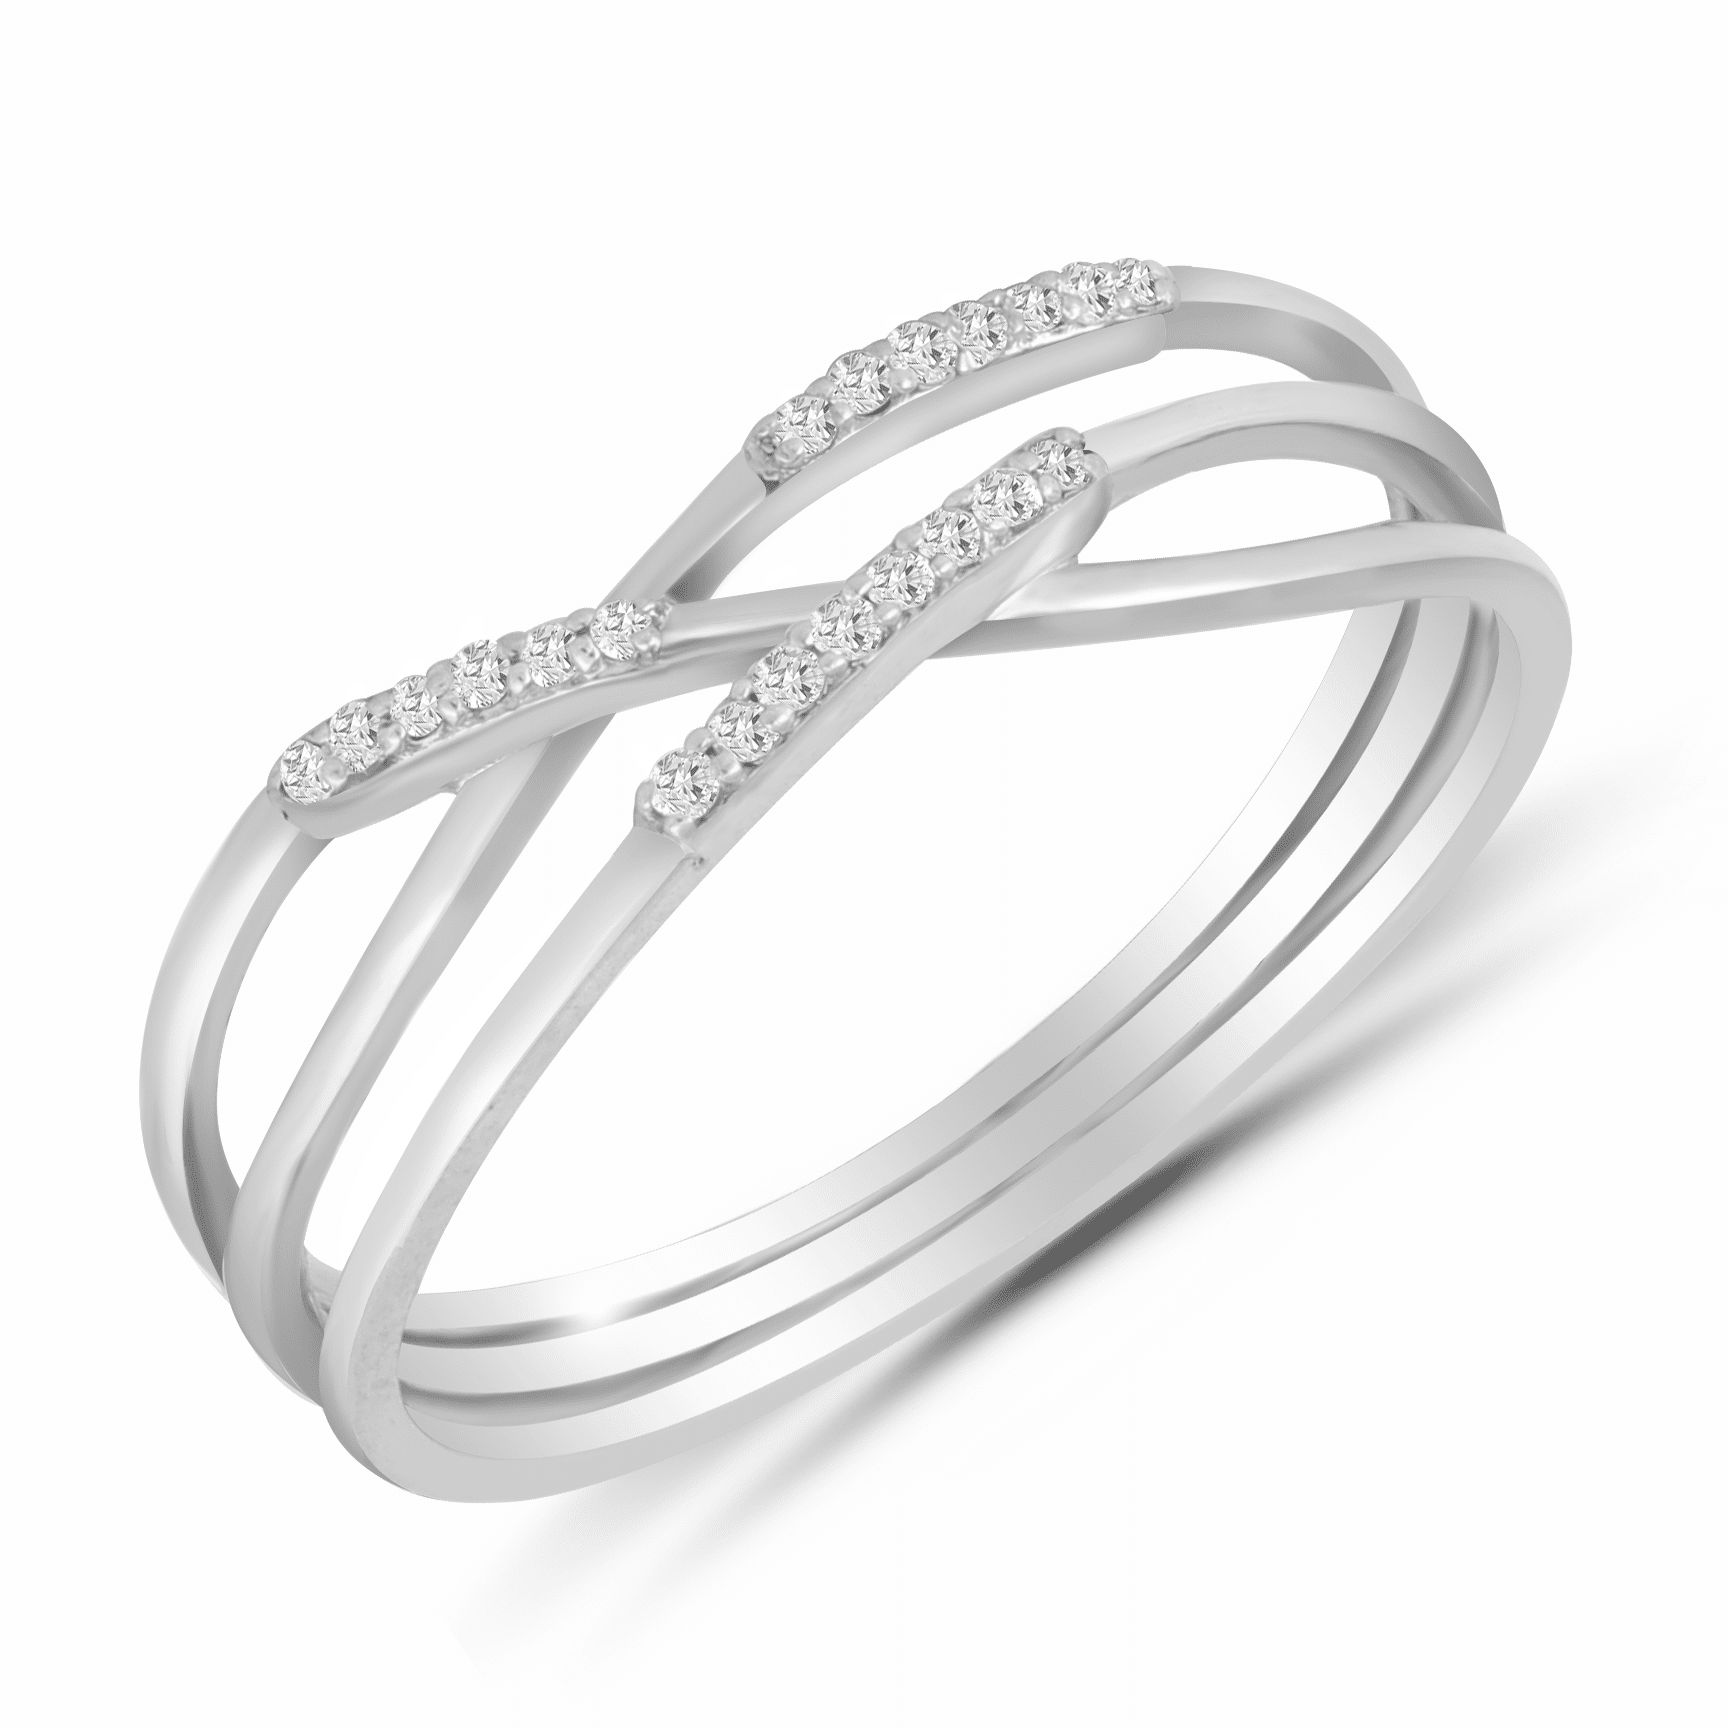 White gold 3 layer ring